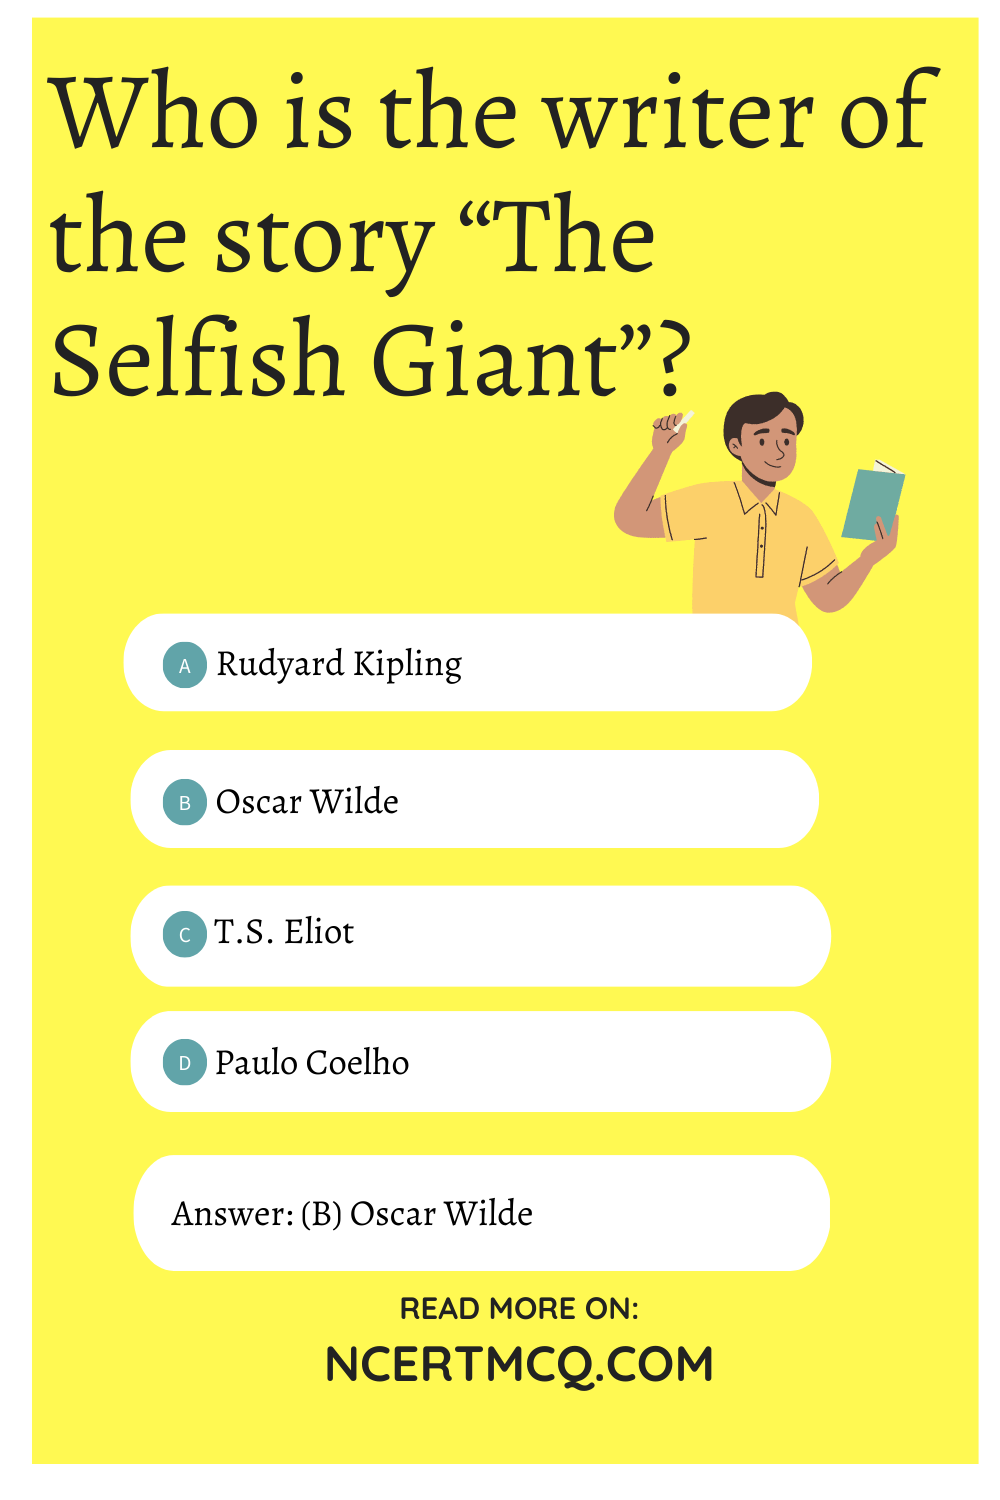 Who is the writer of the story “The Selfish Giant”?